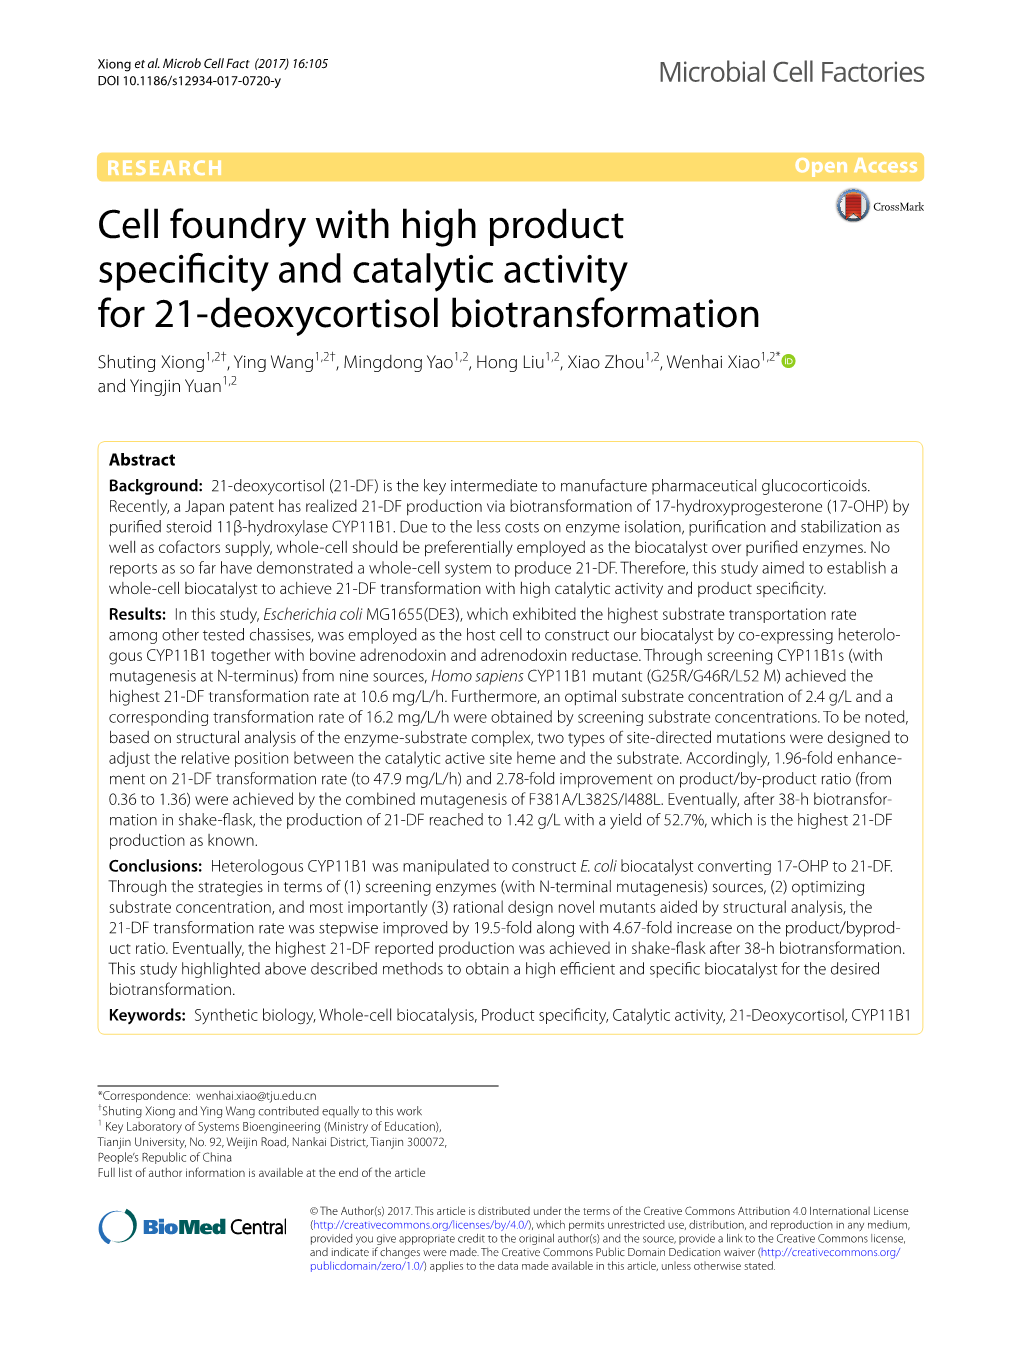 Cell Foundry with High Product Specificity and Catalytic Activity For